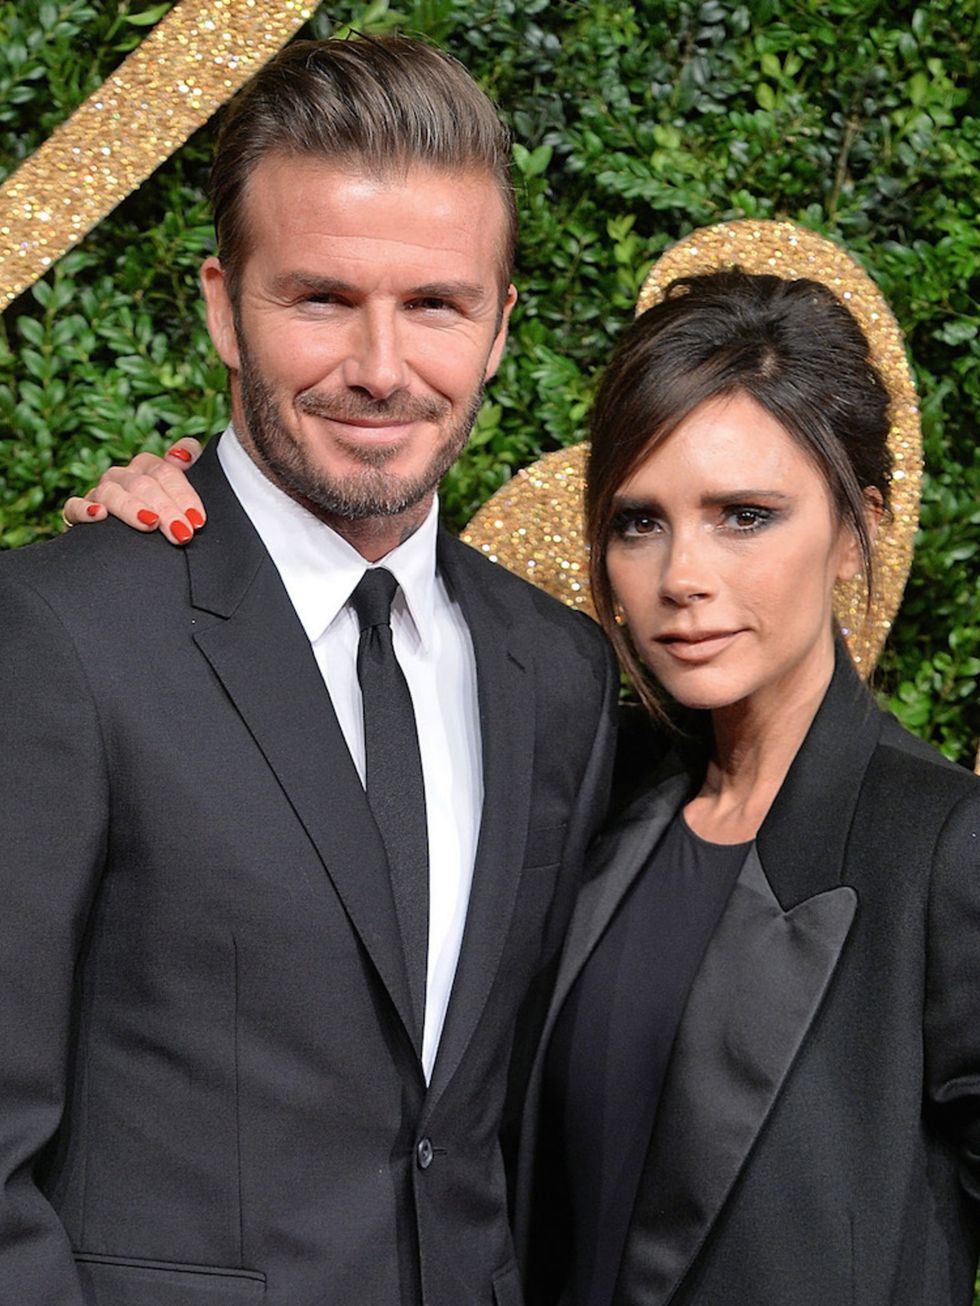 <p><strong>David and Victoria Beckham </strong></p>

<p><strong>Nominated for:</strong> One was a footballing legend, the other formed 1/5 of the band that brought us girl power. Together, they gave us ultimate family goals. David and Victoria Beckham des